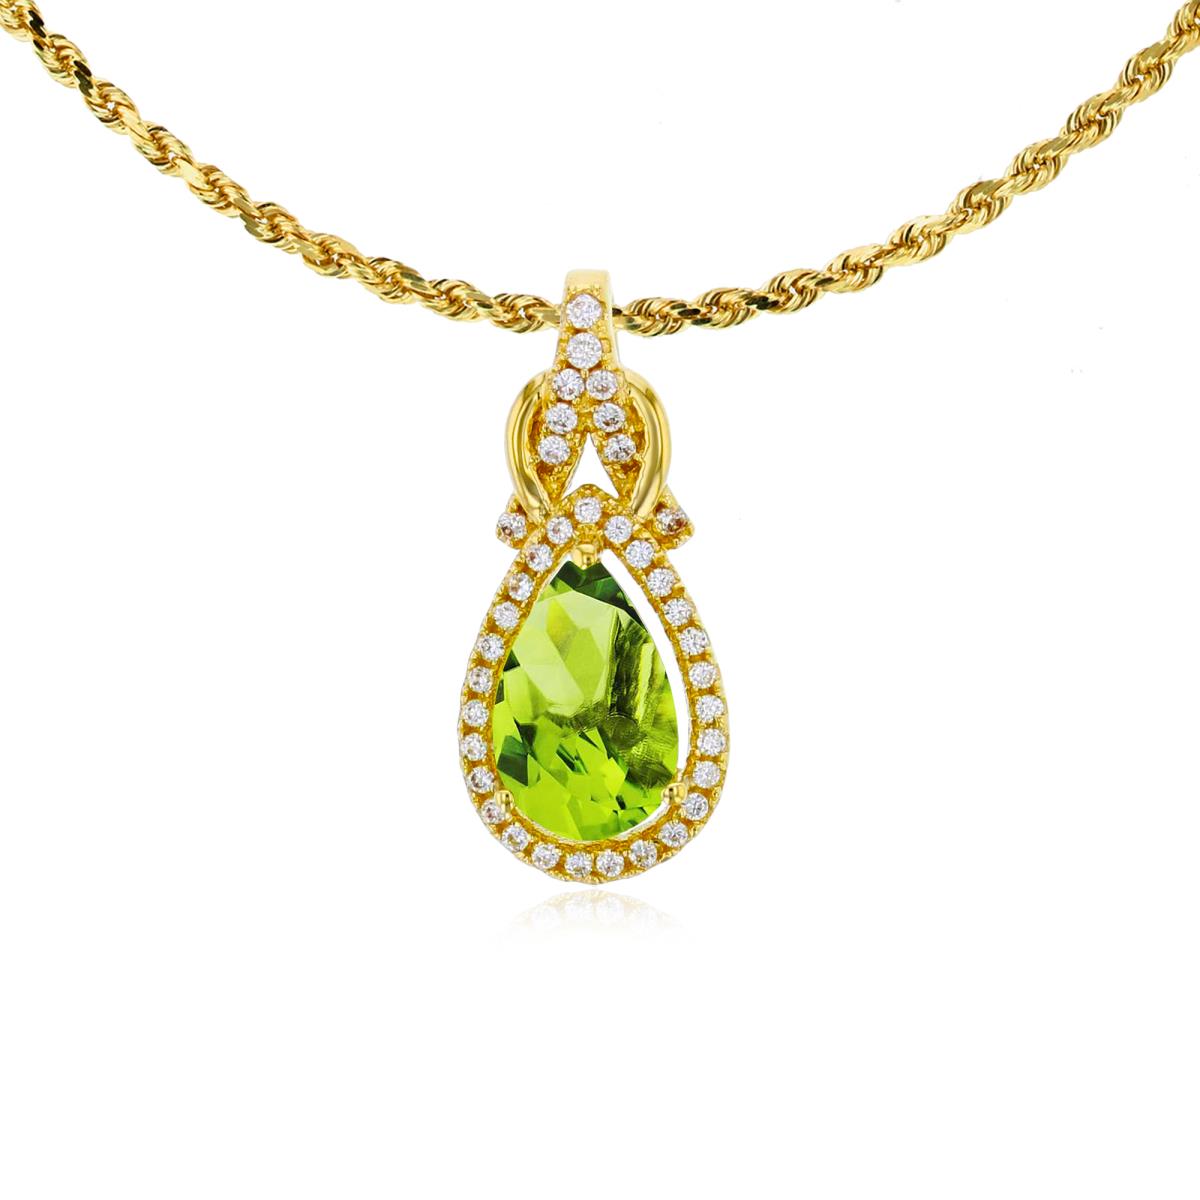 10K Yellow Gold 8x5mm Pear Cut Peridot & 0.11 CTTW Rnd Diamond Knot 18" Rope Chain Necklace